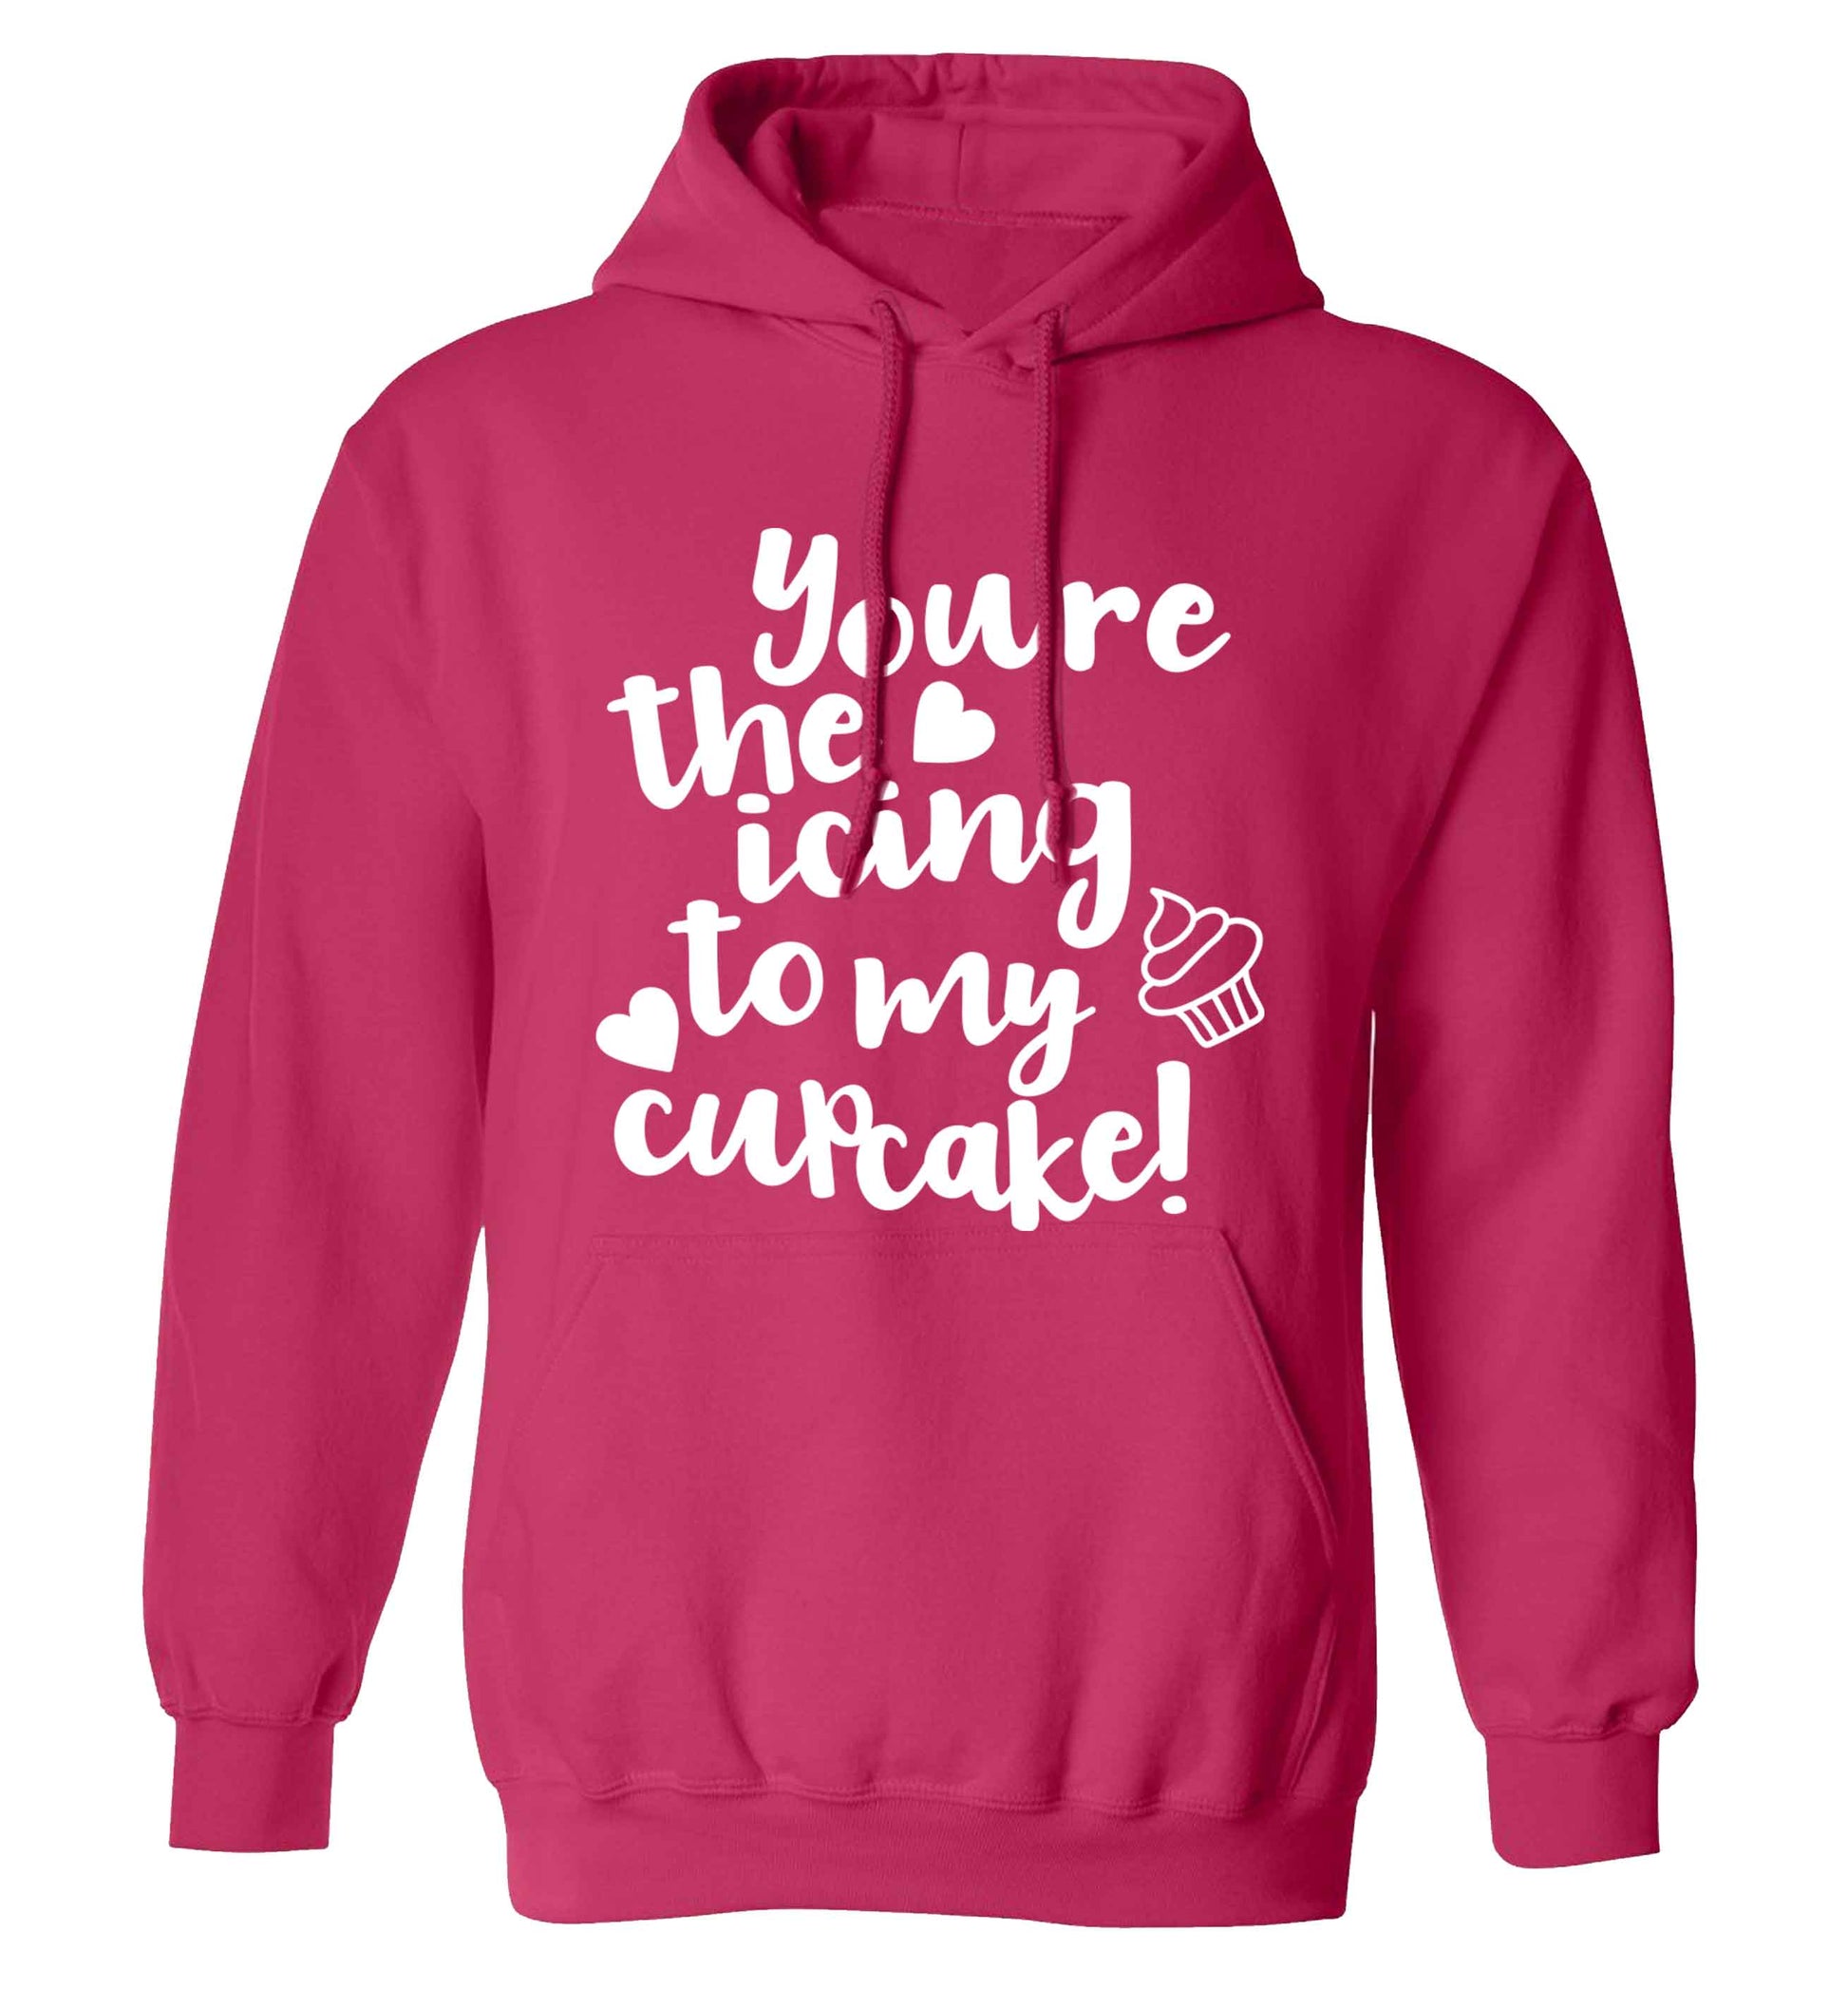 You're the icing to my cupcake adults unisex pink hoodie 2XL